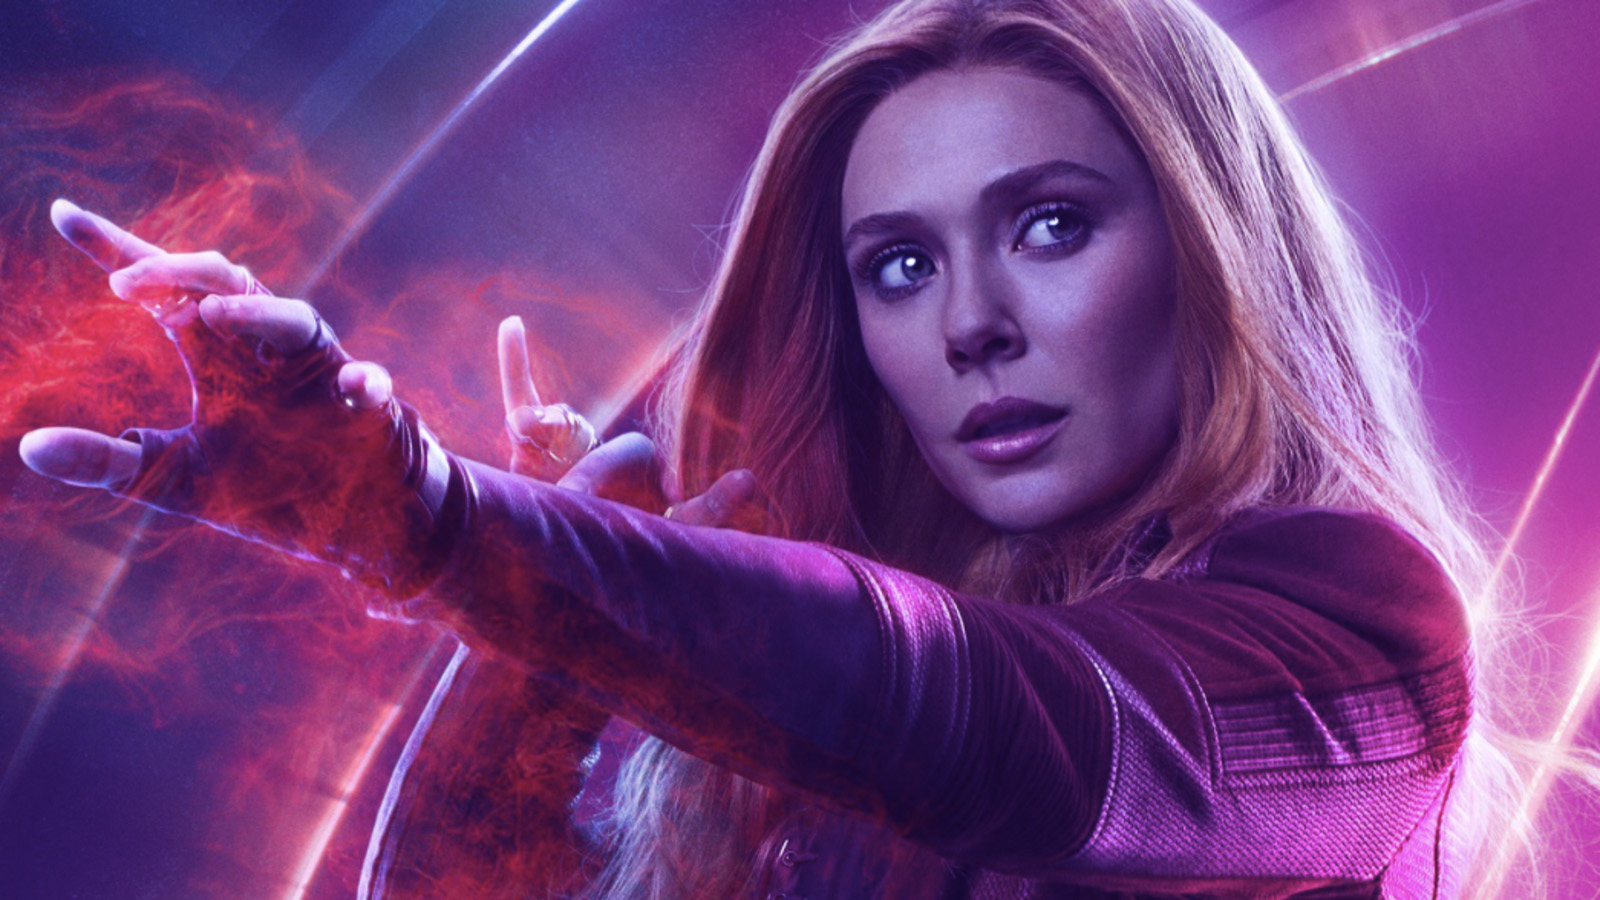 Scarlet Witch's Confirmed MCU Death Still Disservices Wanda Maximoff